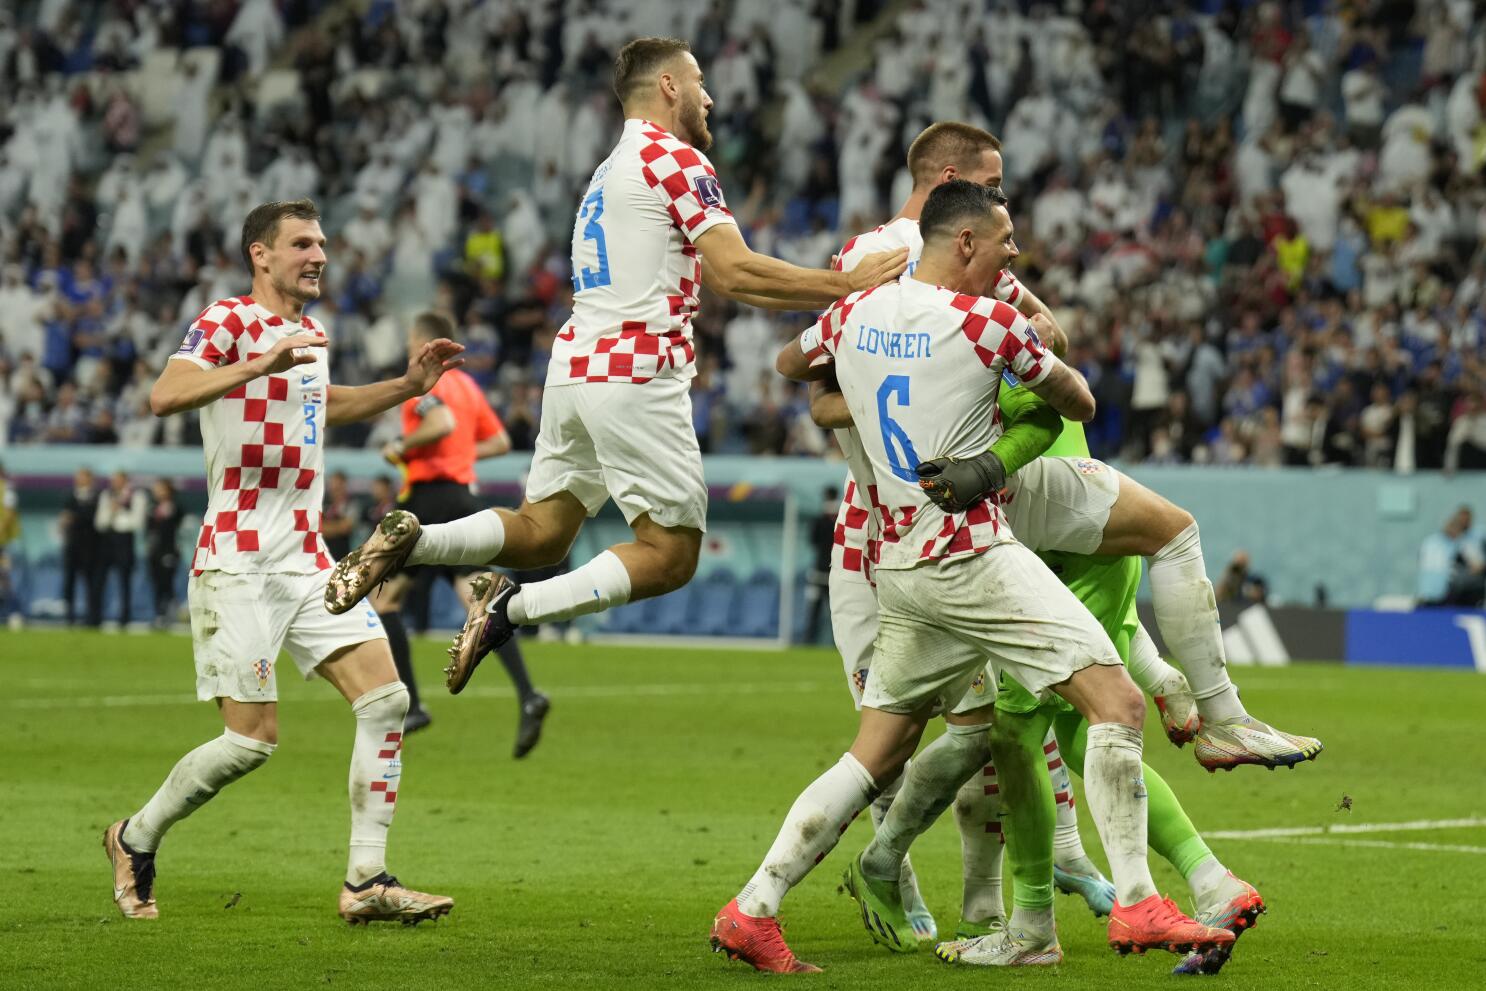 2018 World Cup finals: how to watch France vs. Croatia online - The Verge